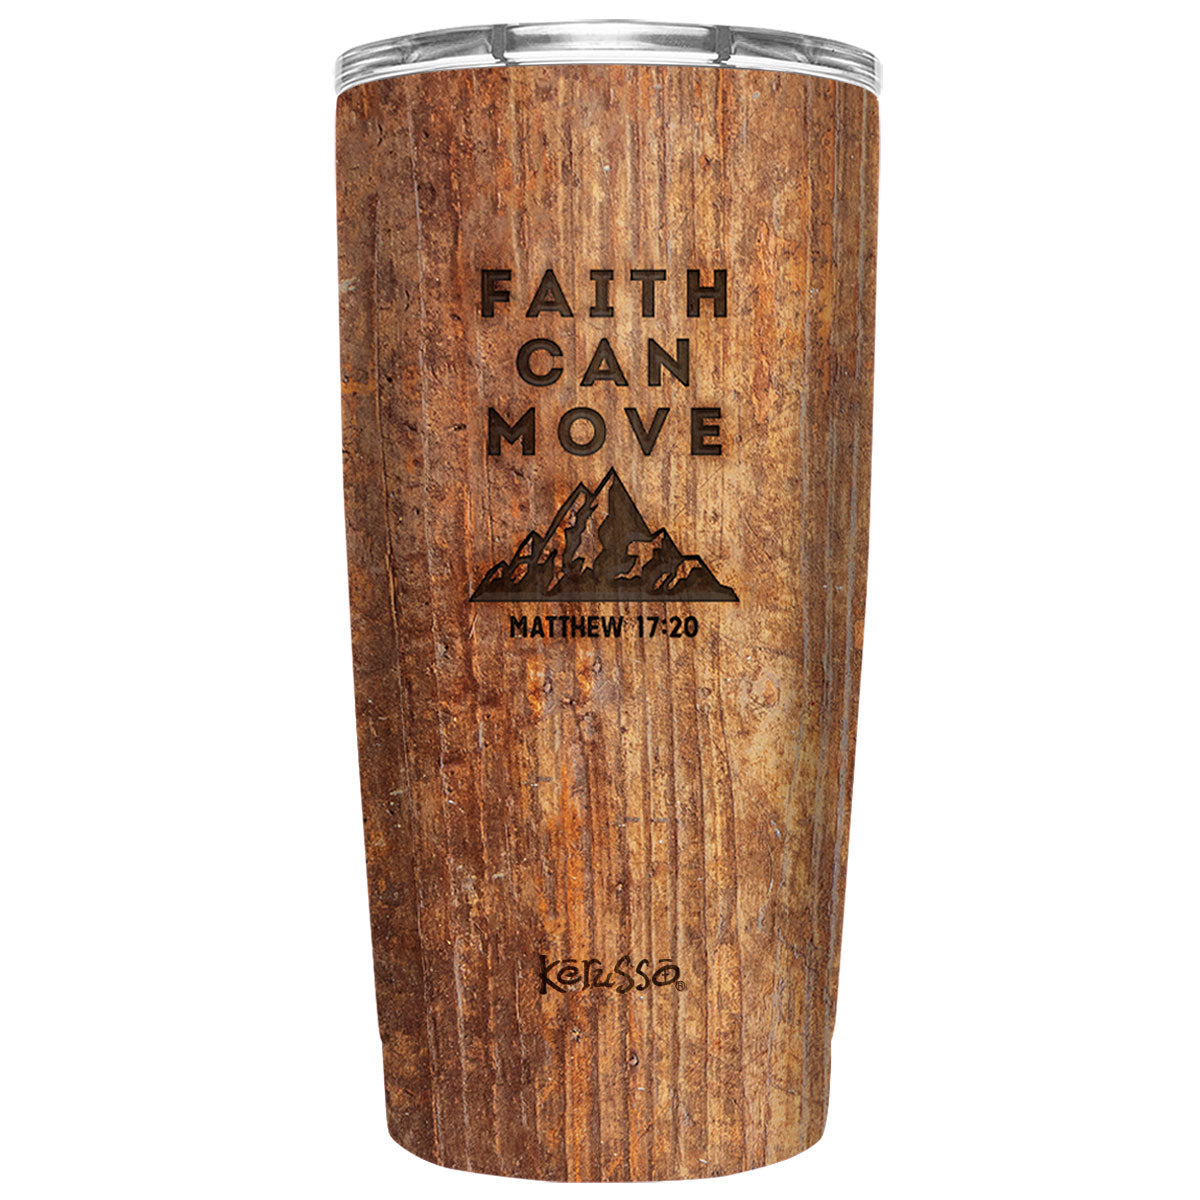 Kerusso Faith Can Move 20 oz Stainless Steel Tumbler